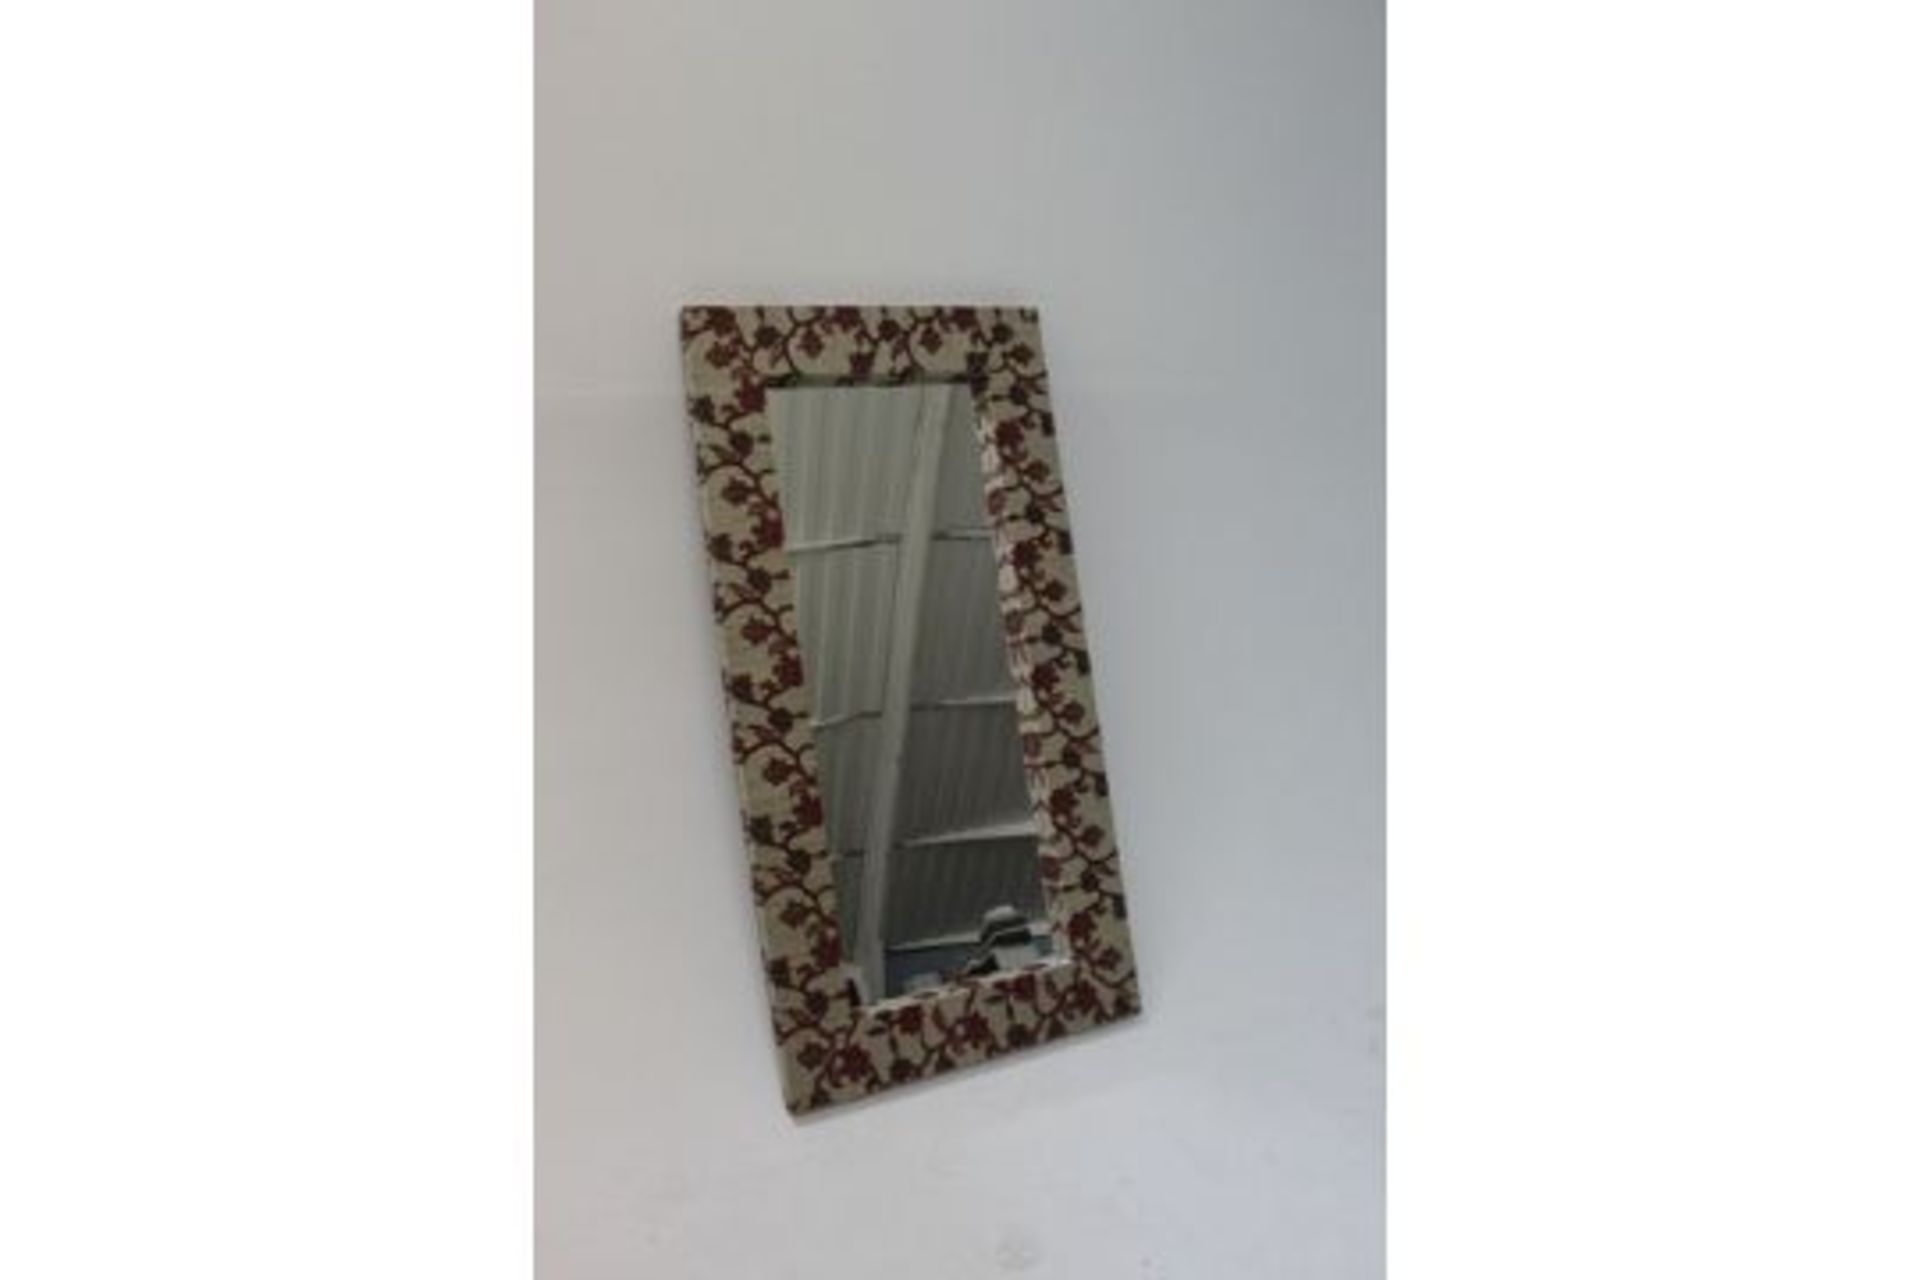 Woven Reed Mirror Red Flower Motif This Range Of Mirrors Are Made From Natural Materials And Evoke A